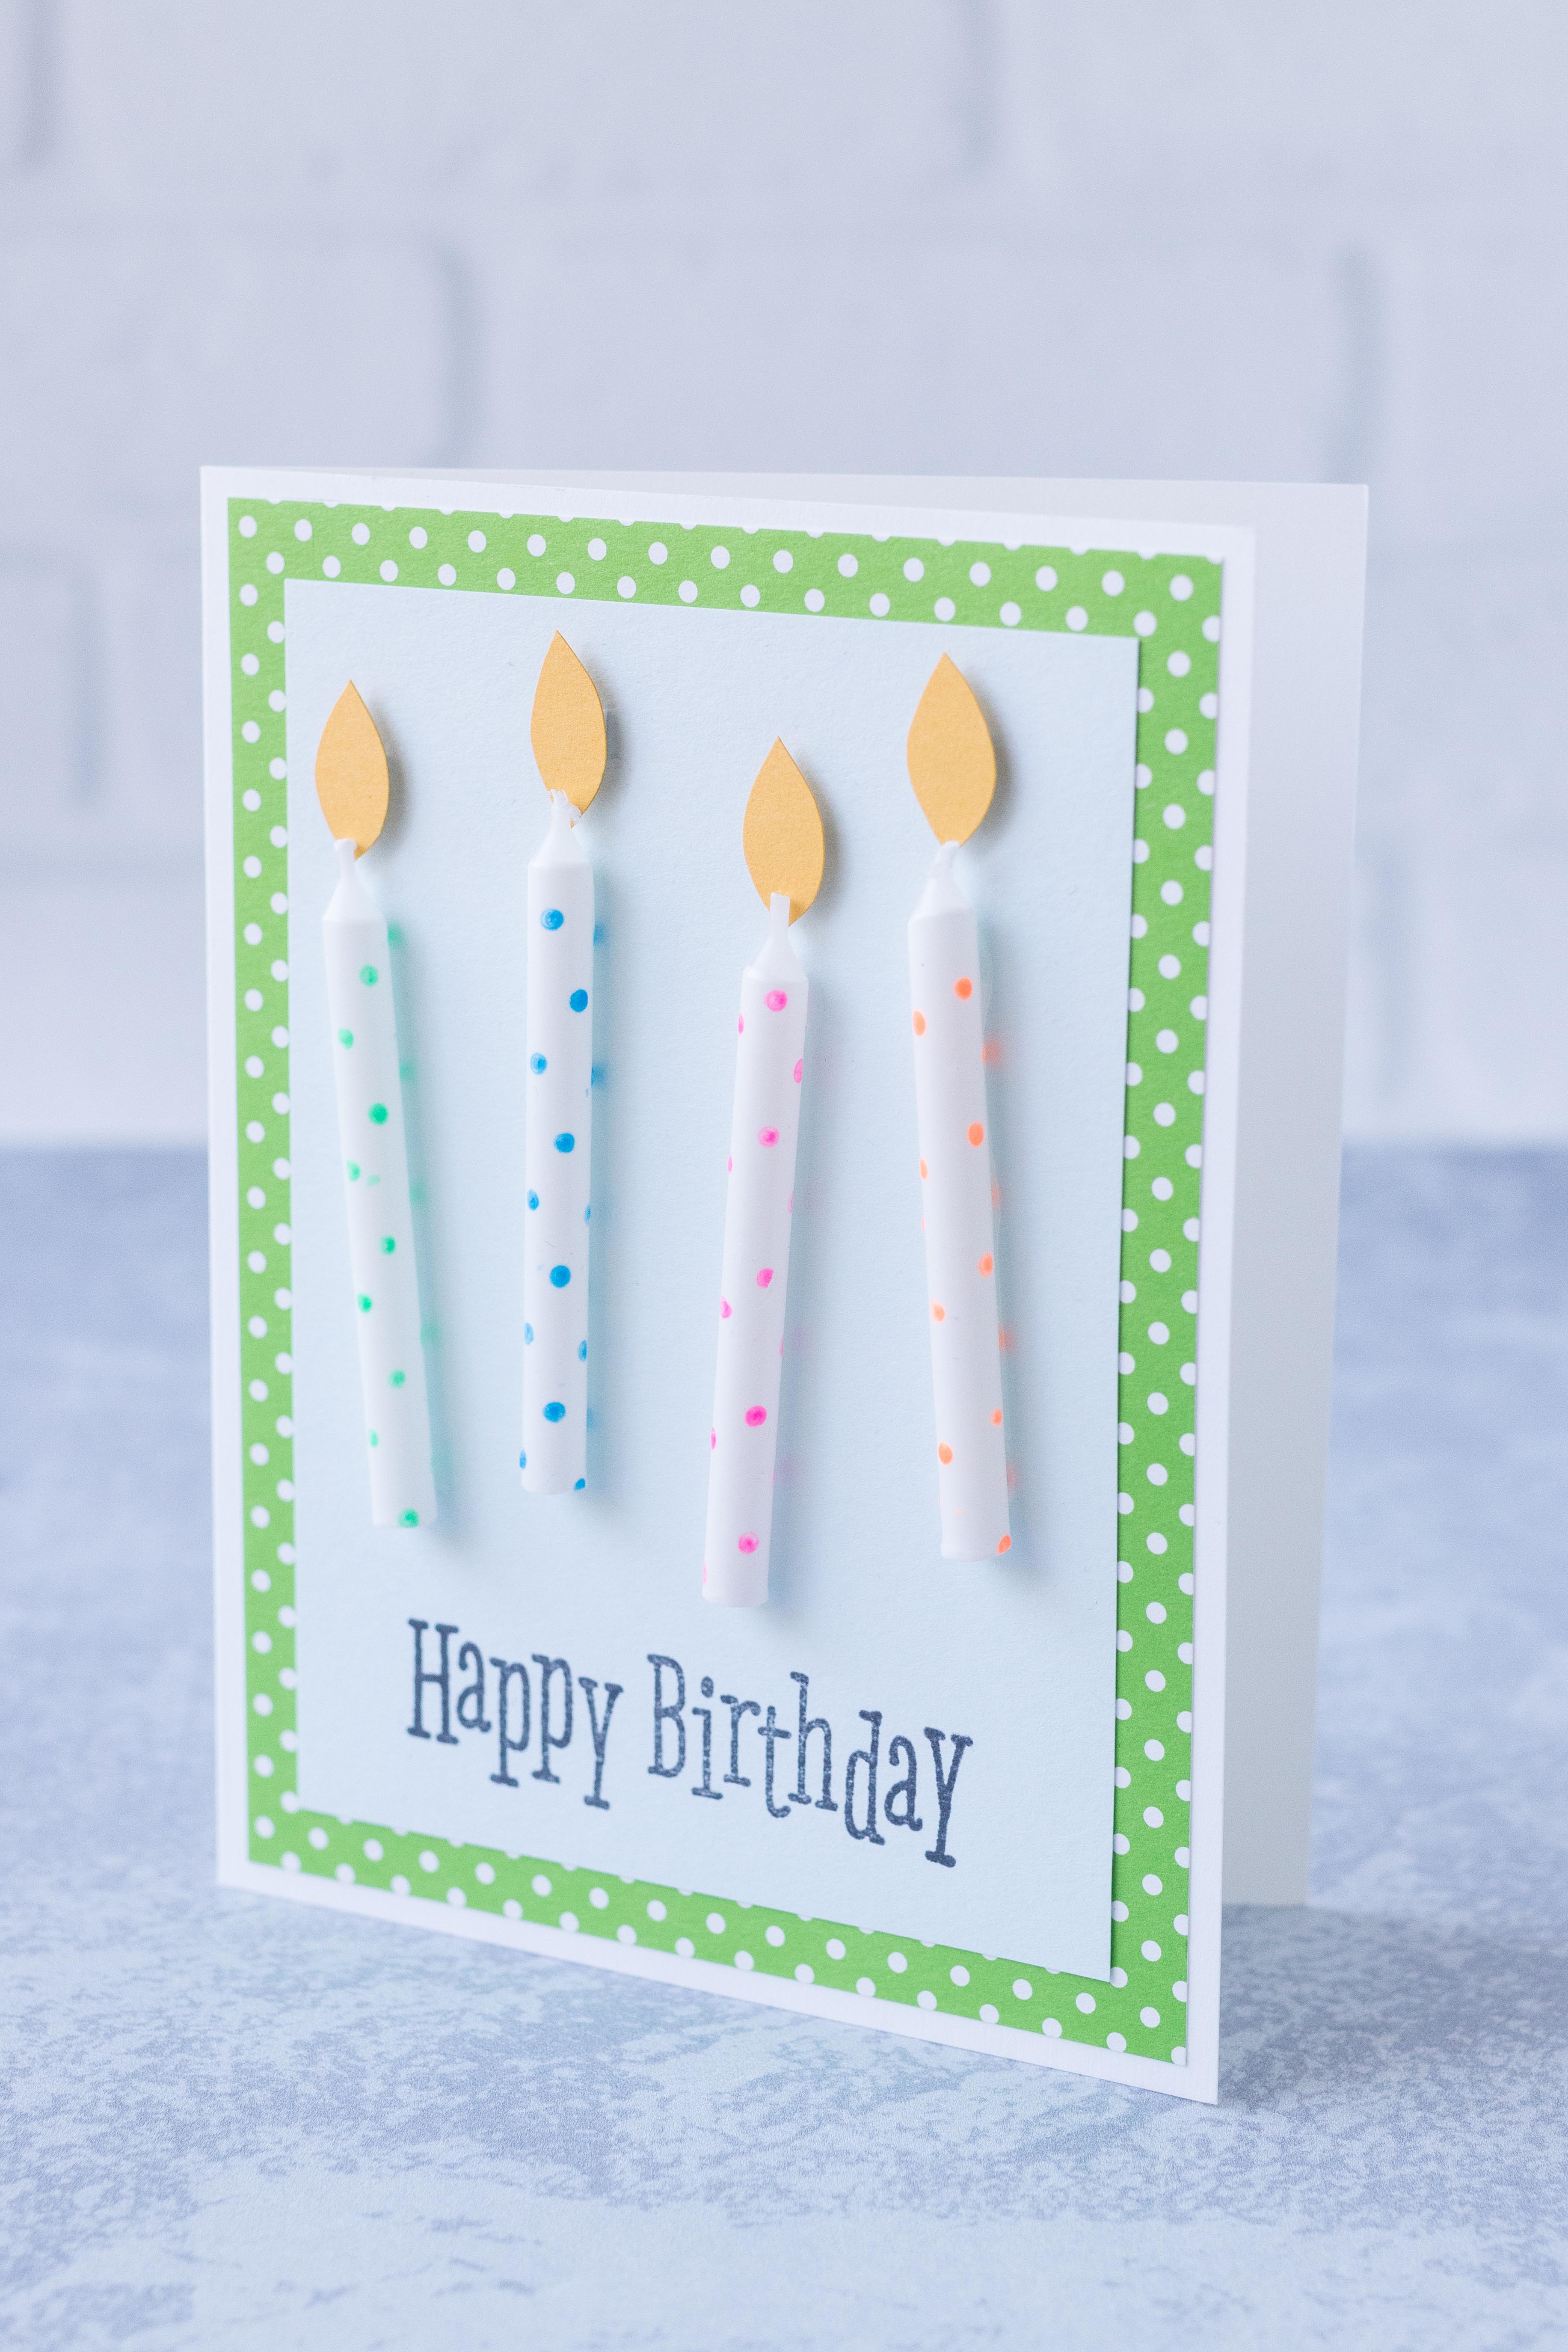 Polka dot birthday candles greeting card. The candles and foam mounted flames provide a neat 3D effect. #DIYbirthdaycard #homemadecard #birthdaycandles | https://www.roseclearfield.com